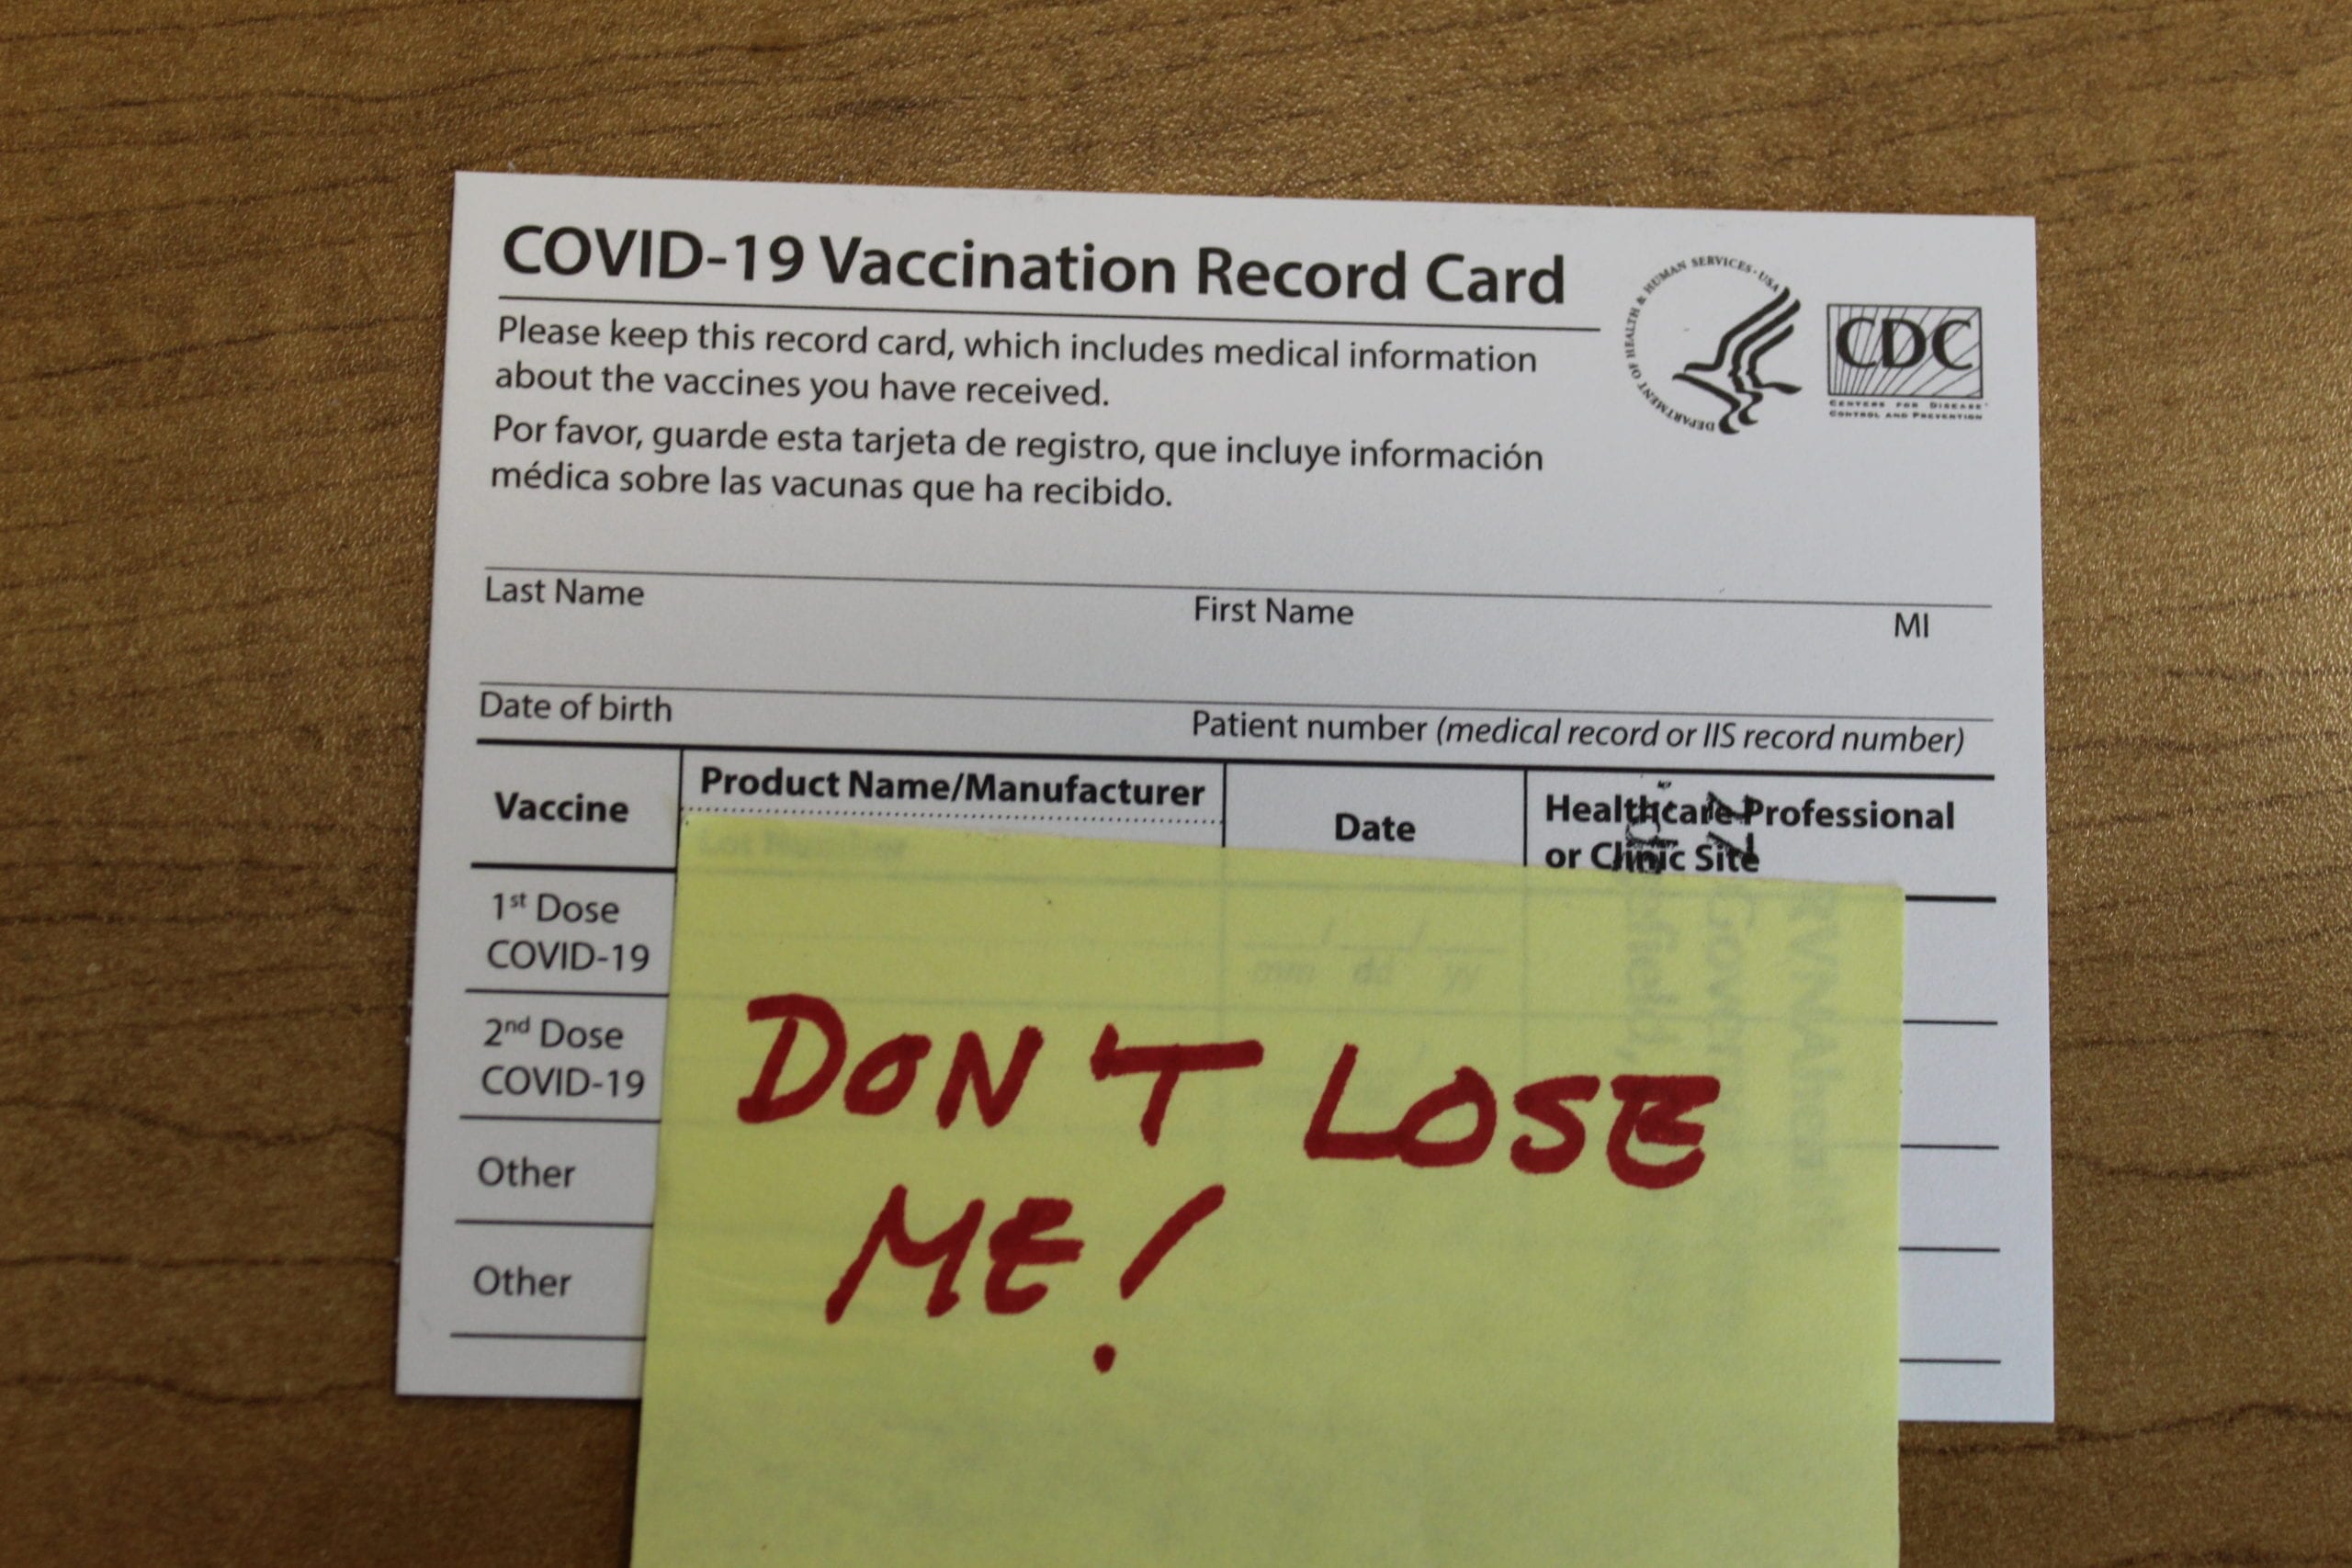 Keep your CDC vaccine card safe with these Covid vaccination card holders